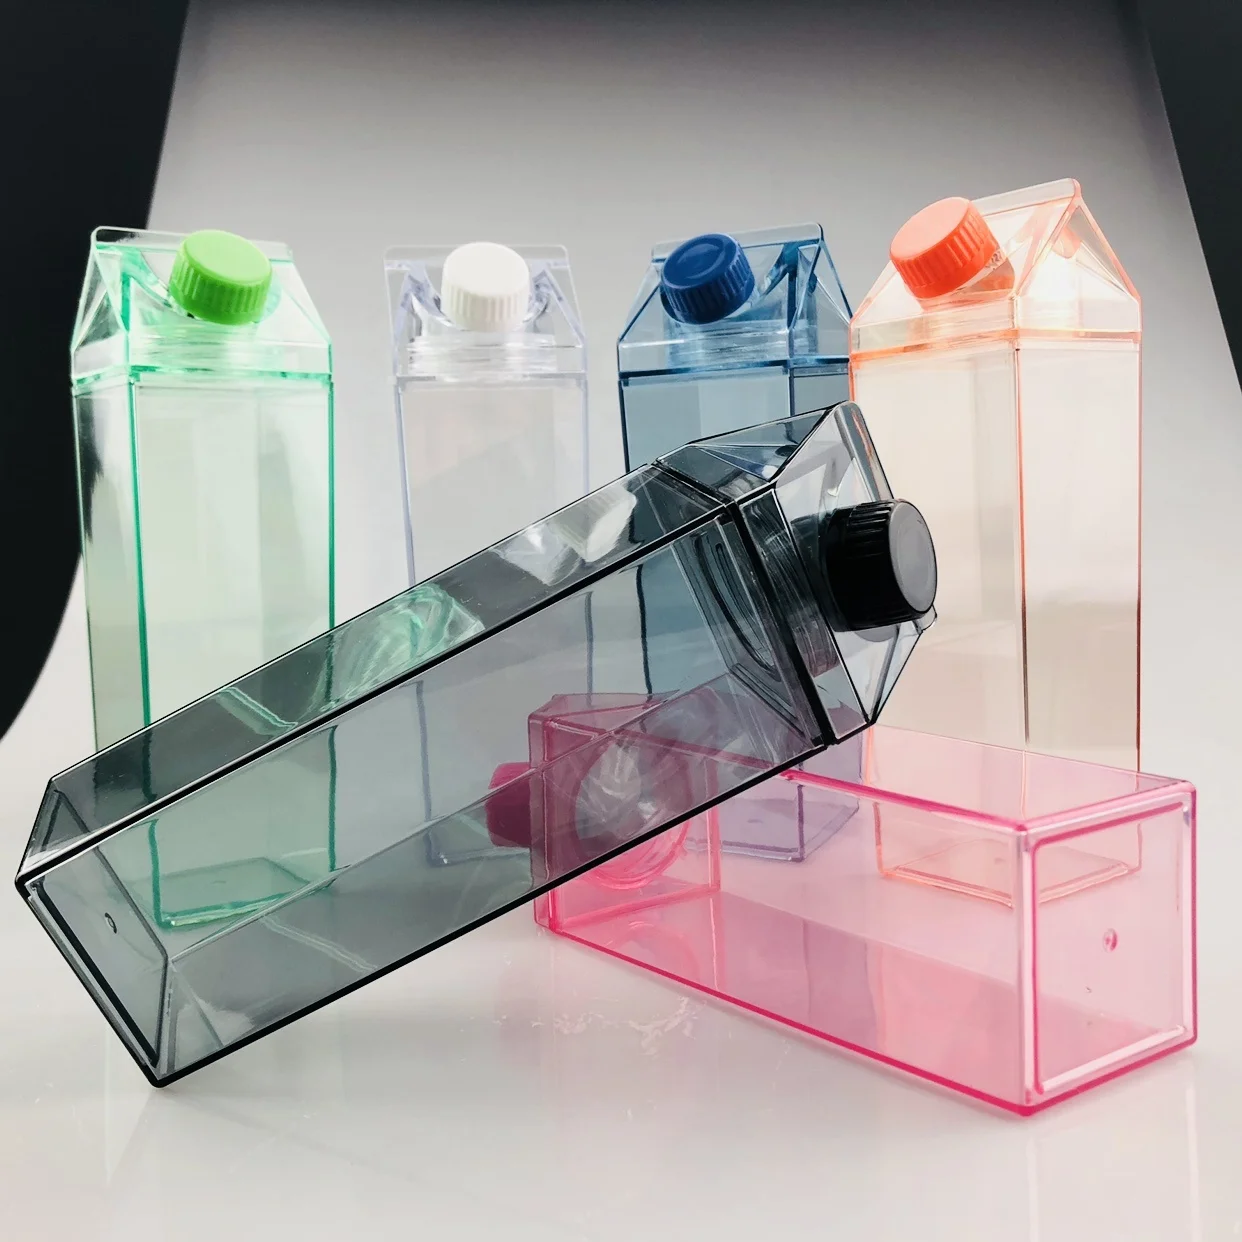 

Hot selling BPA-free 500ml acrylic plastic transparent clear milk carton water bottle with lid